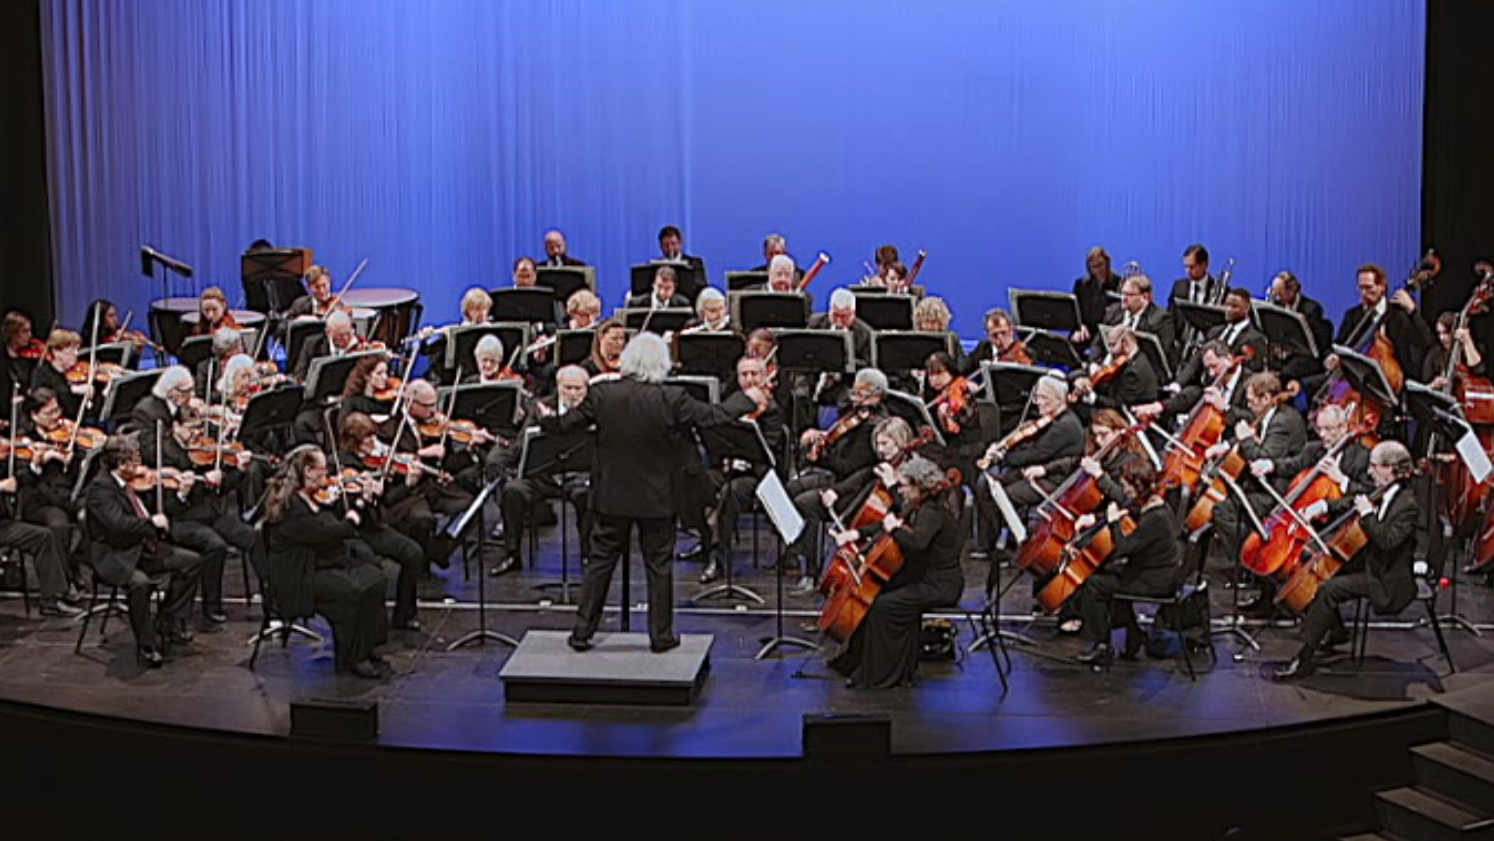 The Orchestra in Robert Frost Auditorium